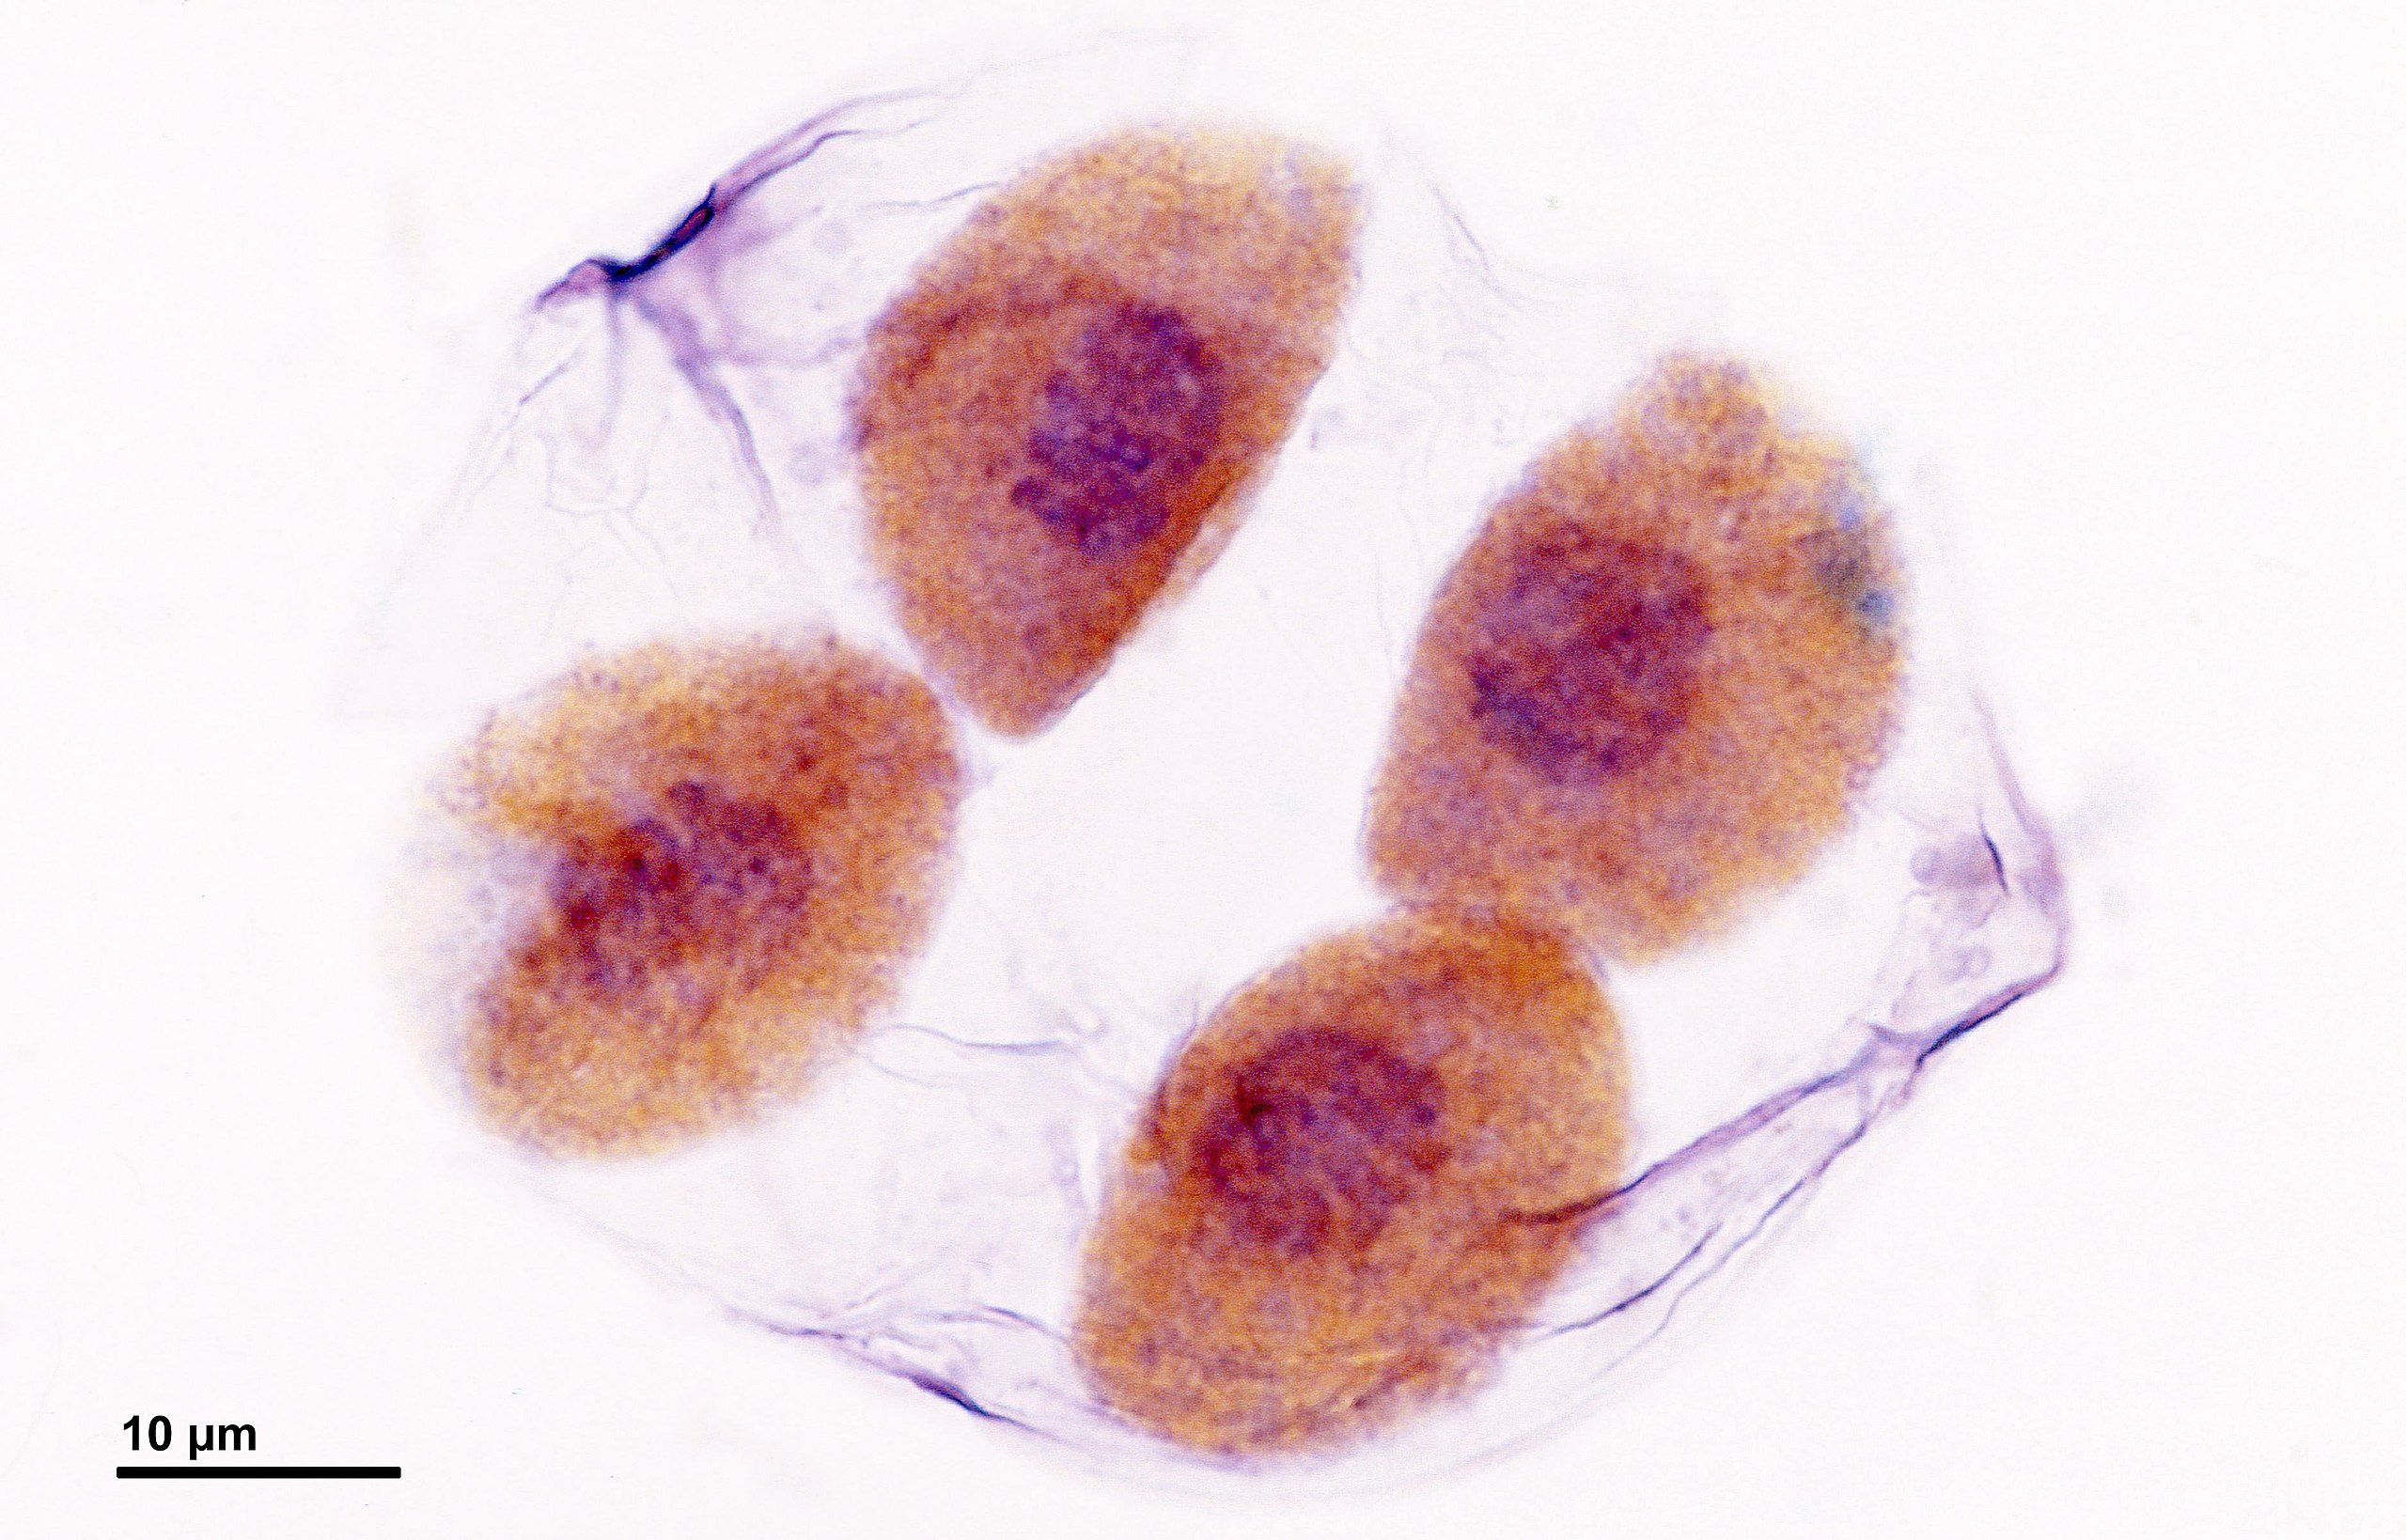 Four newly formed cells, still within the mother cell's cell wall. Each has a distinct nucleus and its own thick cell wall.